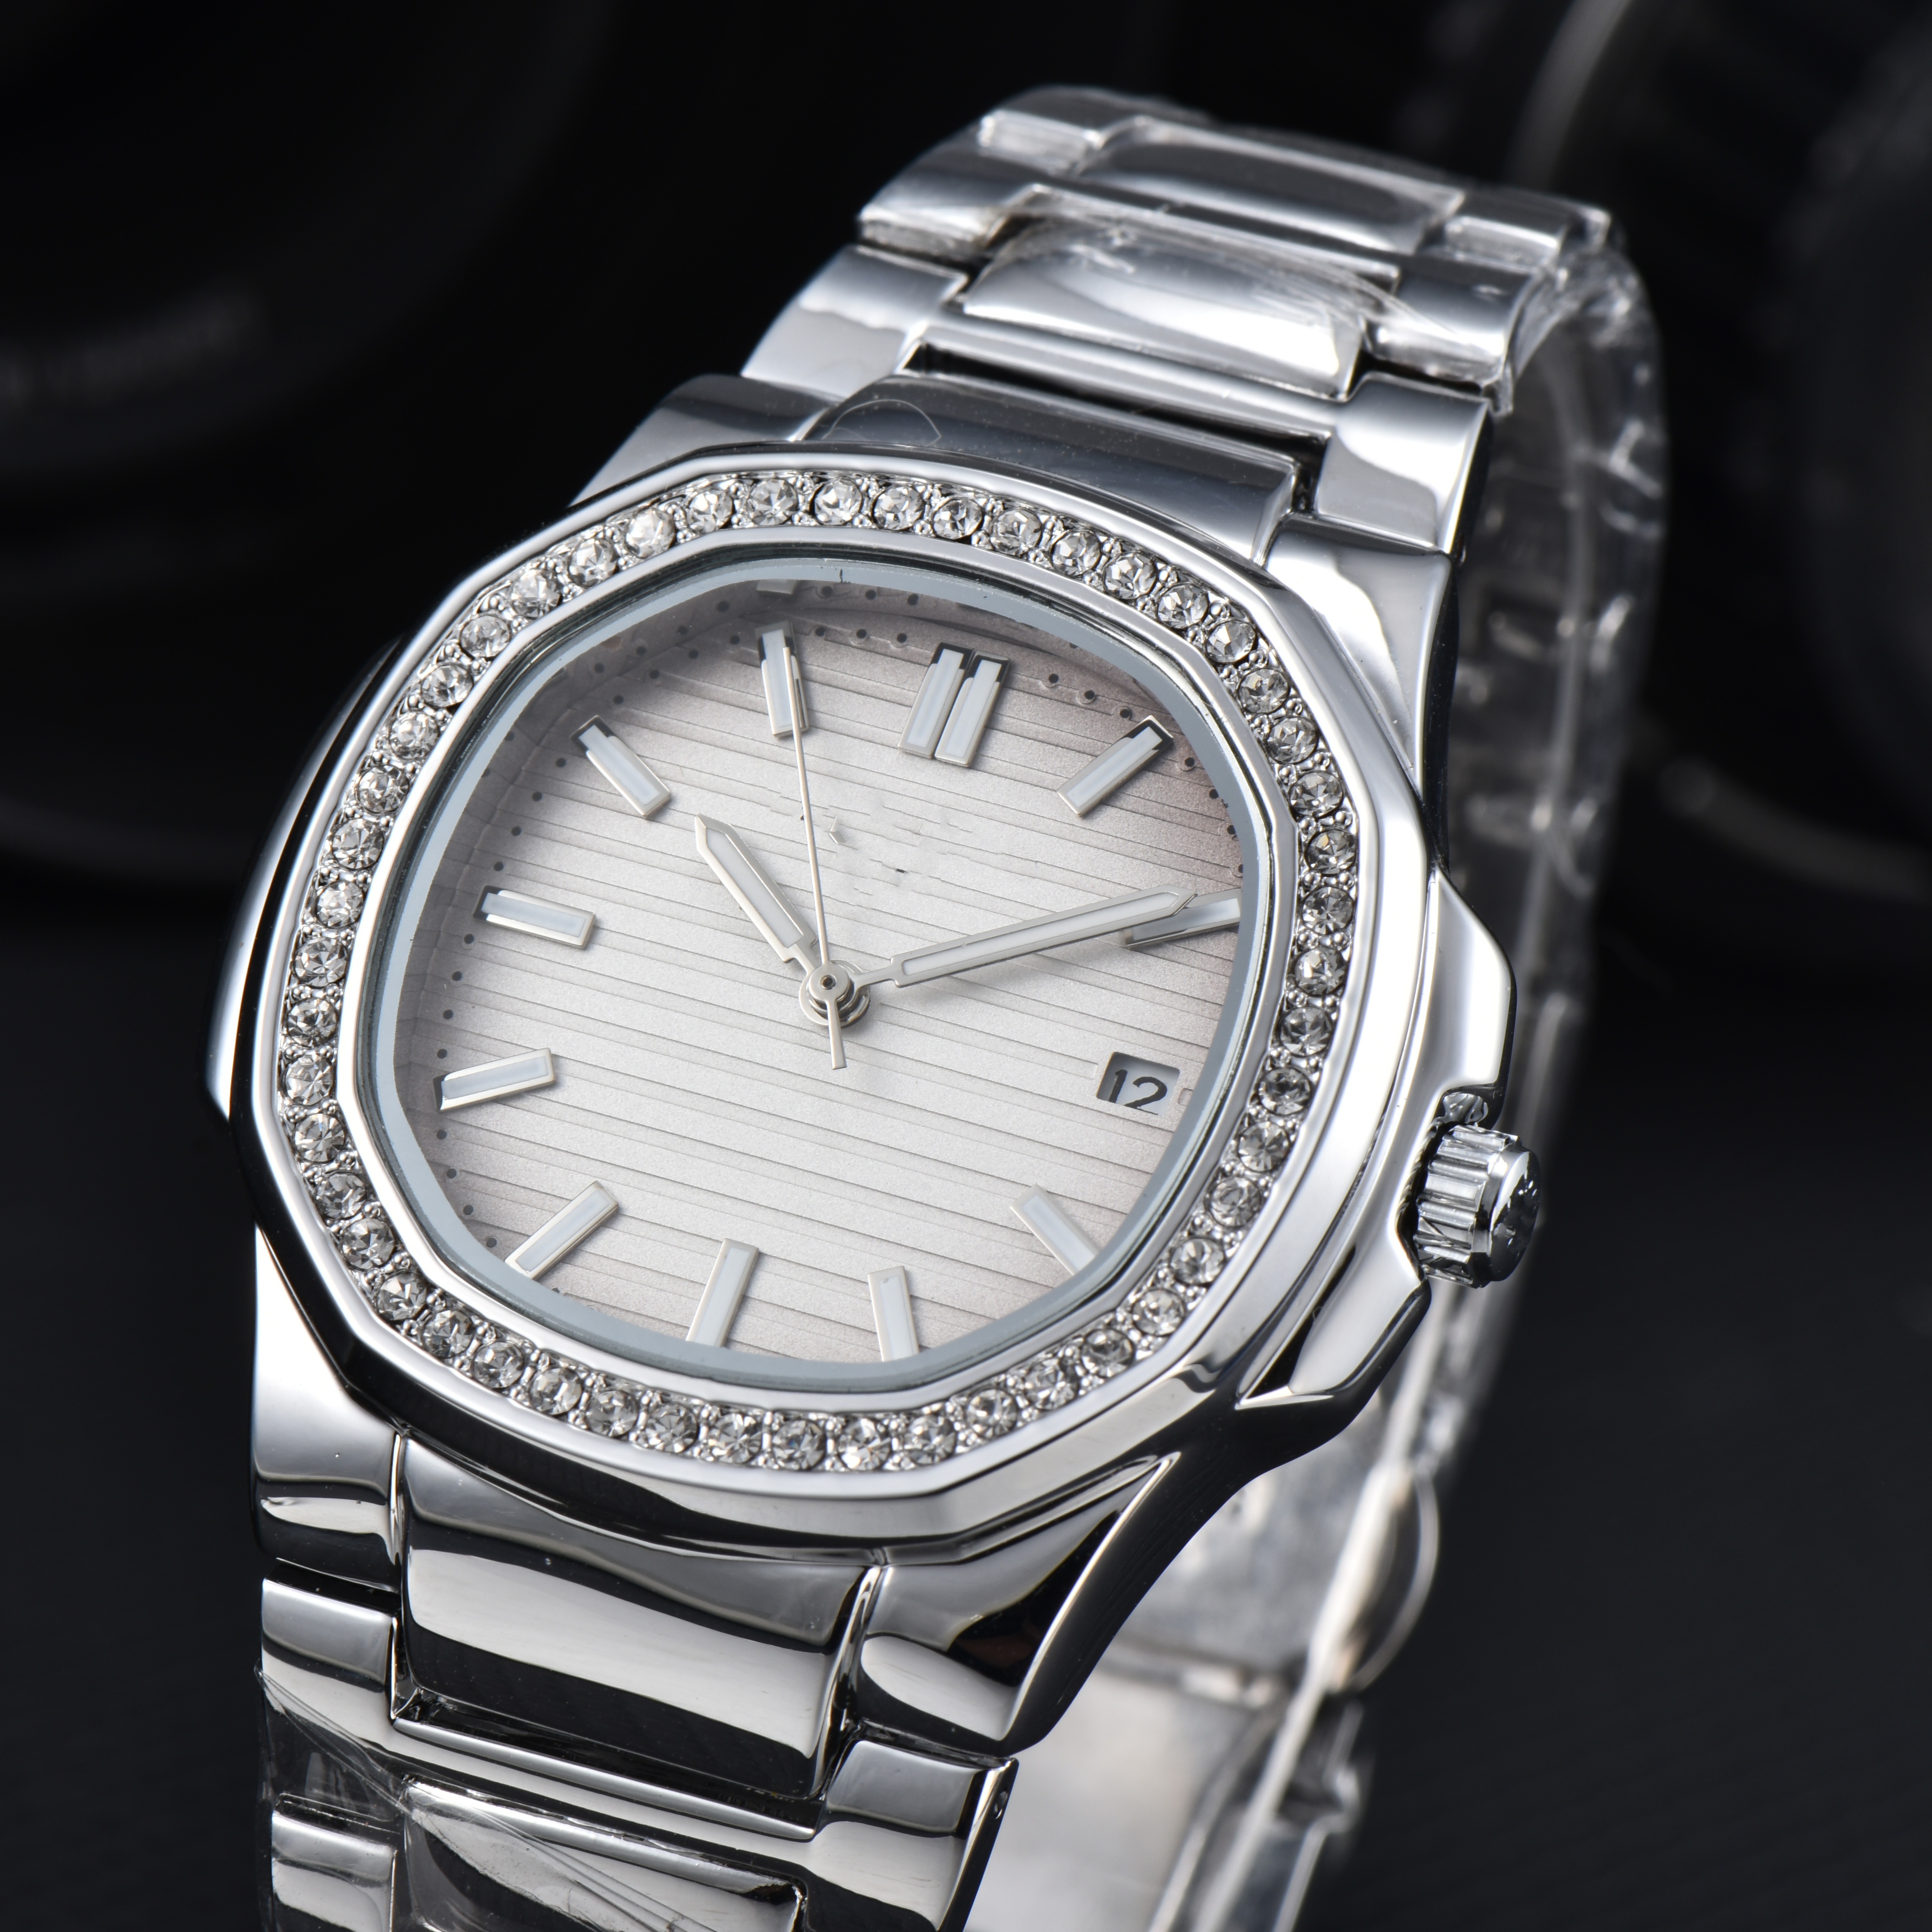 New all-in-one gift watch with diamond, classic three-pin watch, all stainless steel watch